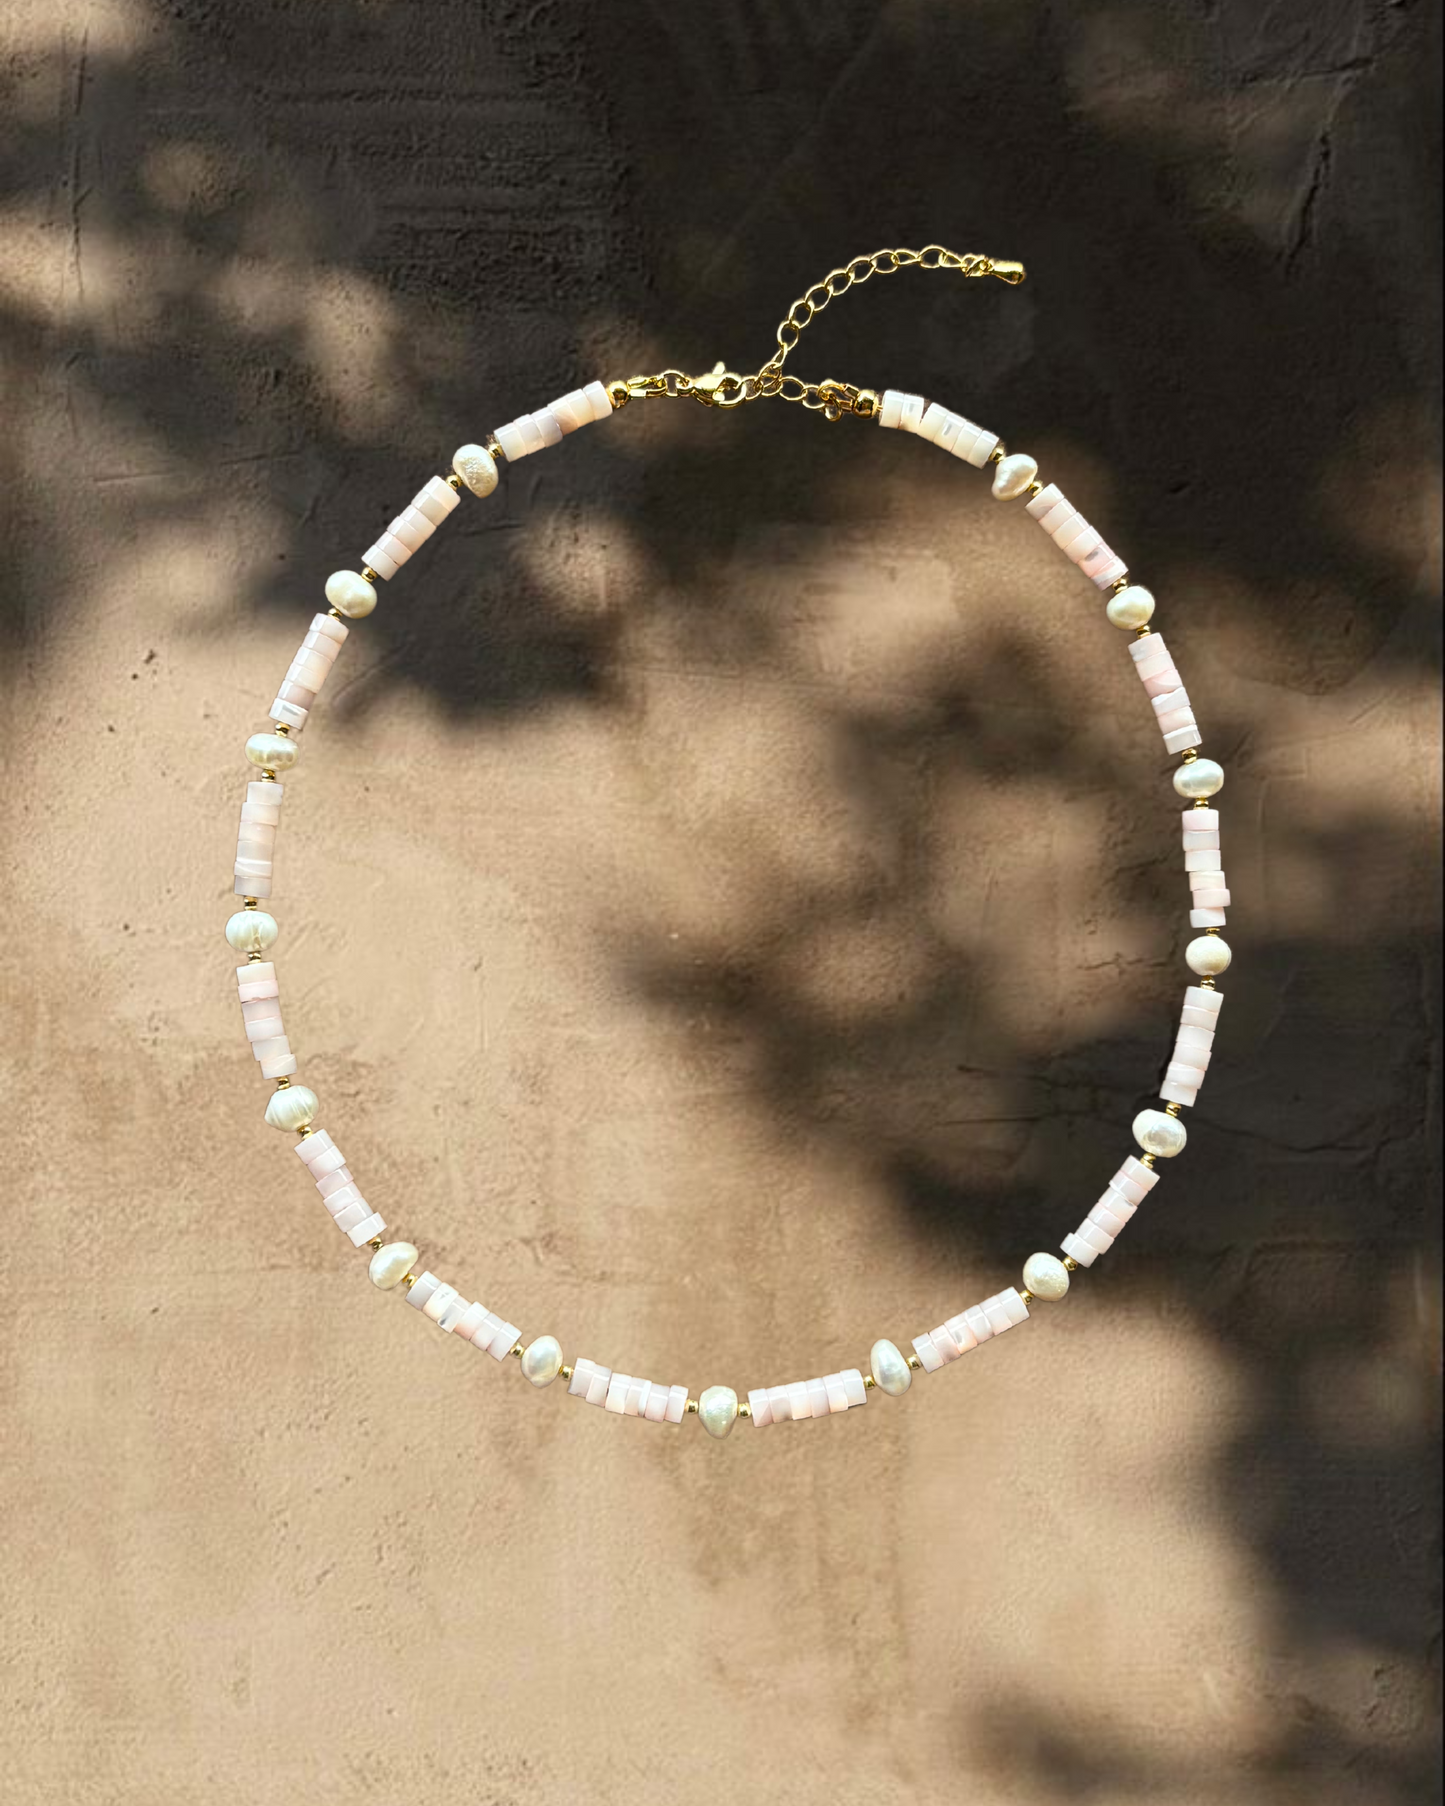 Natural stone necklace with pearls